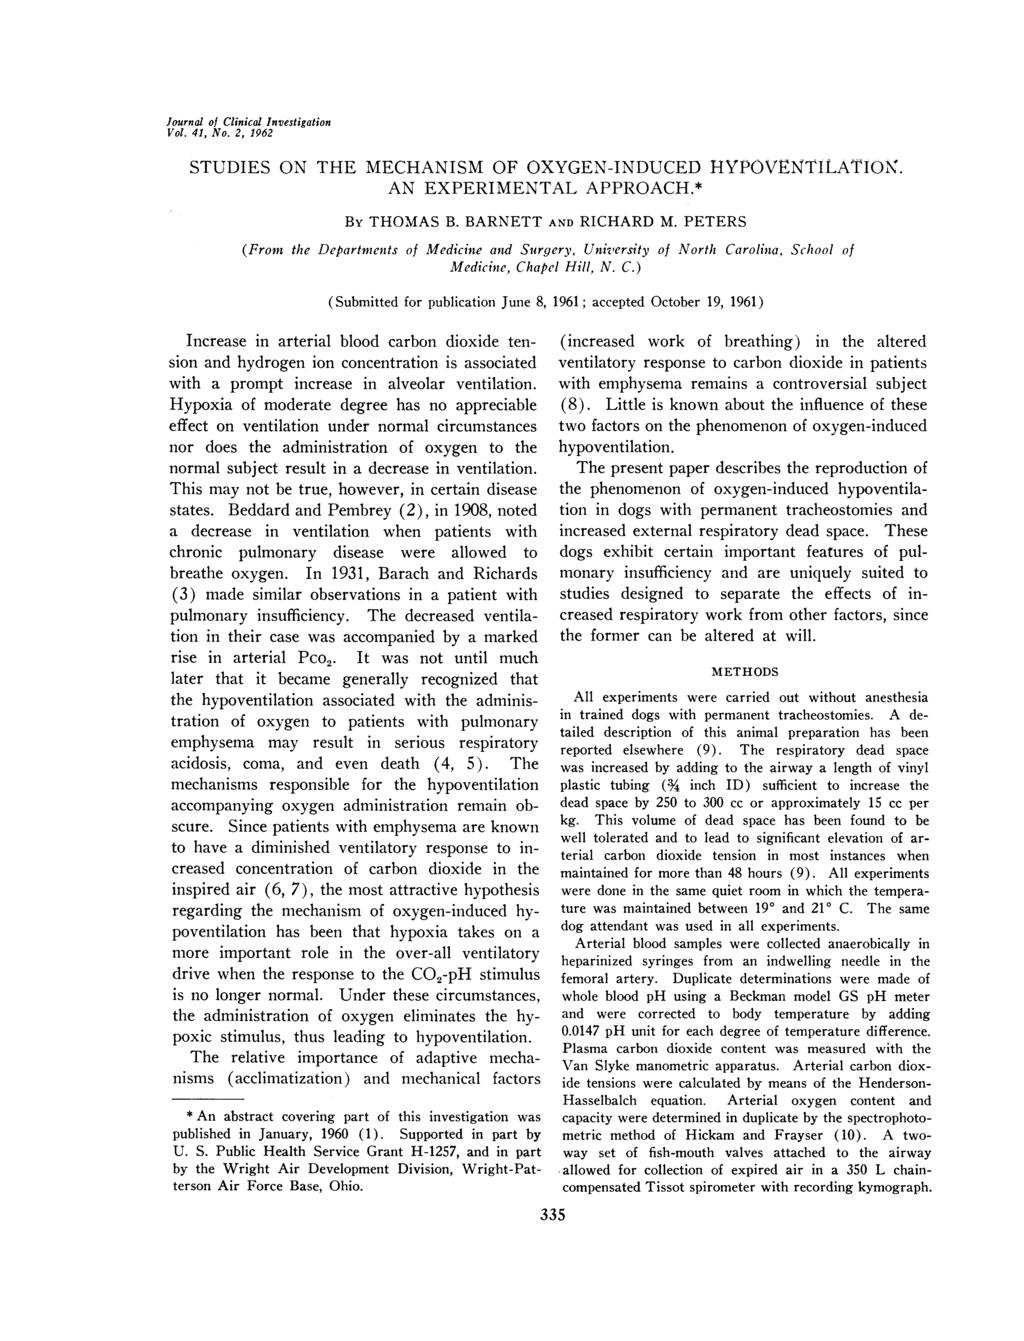 Journal of Clinical Investigation Vol. 41, No. 2, 1962 STUDIES ON THE MECHANISM OF OXYGEN-INDUCED HYPOVENTILATION. AN EXPERIMENTAL APPROACH.* By THOMAS B. BARNETT AND RICHARD M.